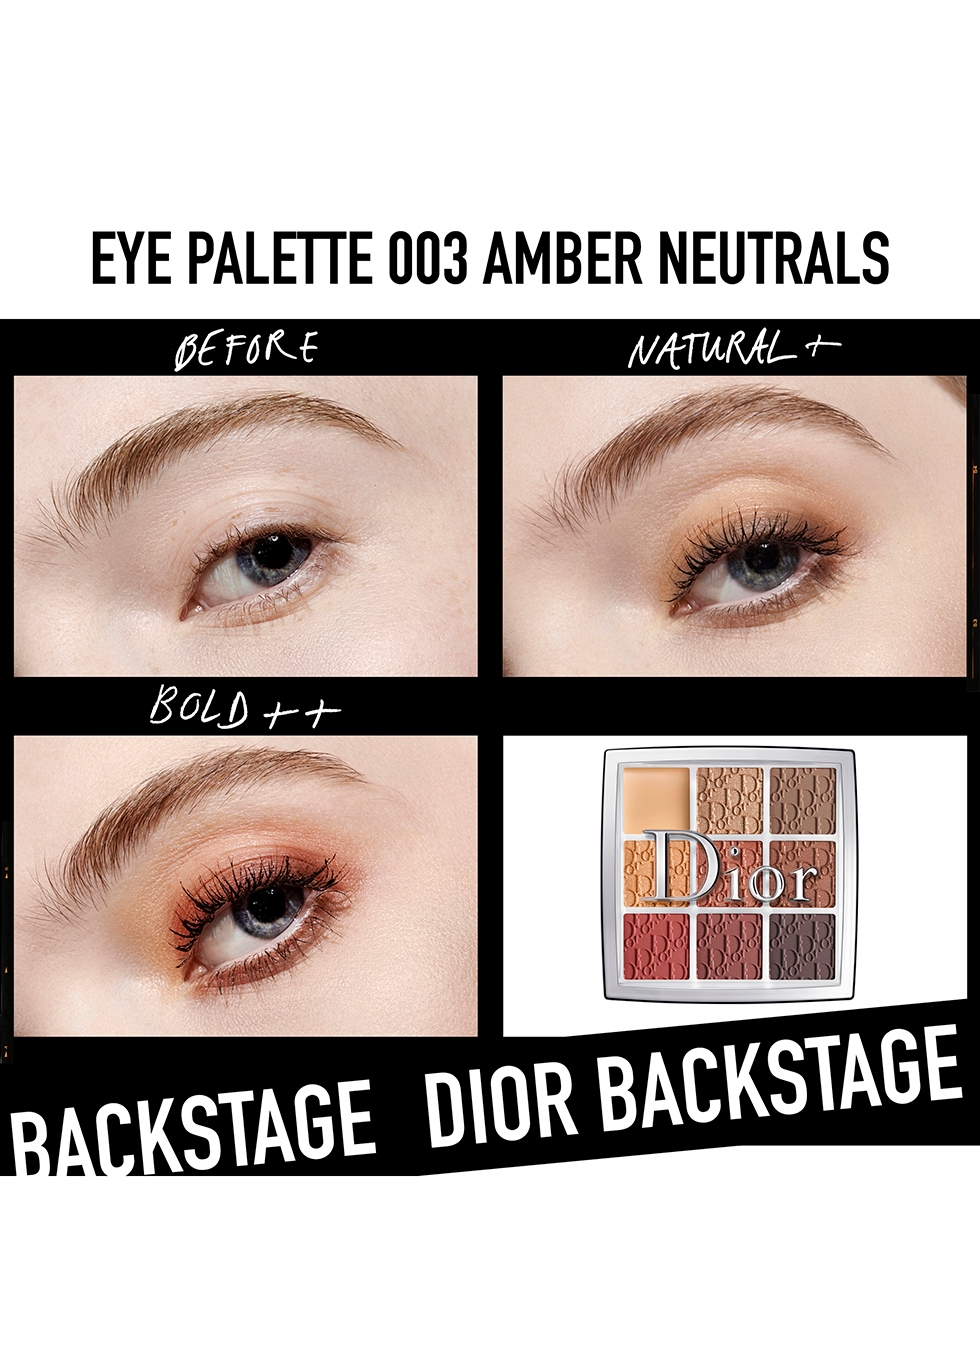 Dior Backstage Eye Pallete Code Amber Neutral Beauty Personal Care Face  Makeup On Carousell  sabotigasantanyicom